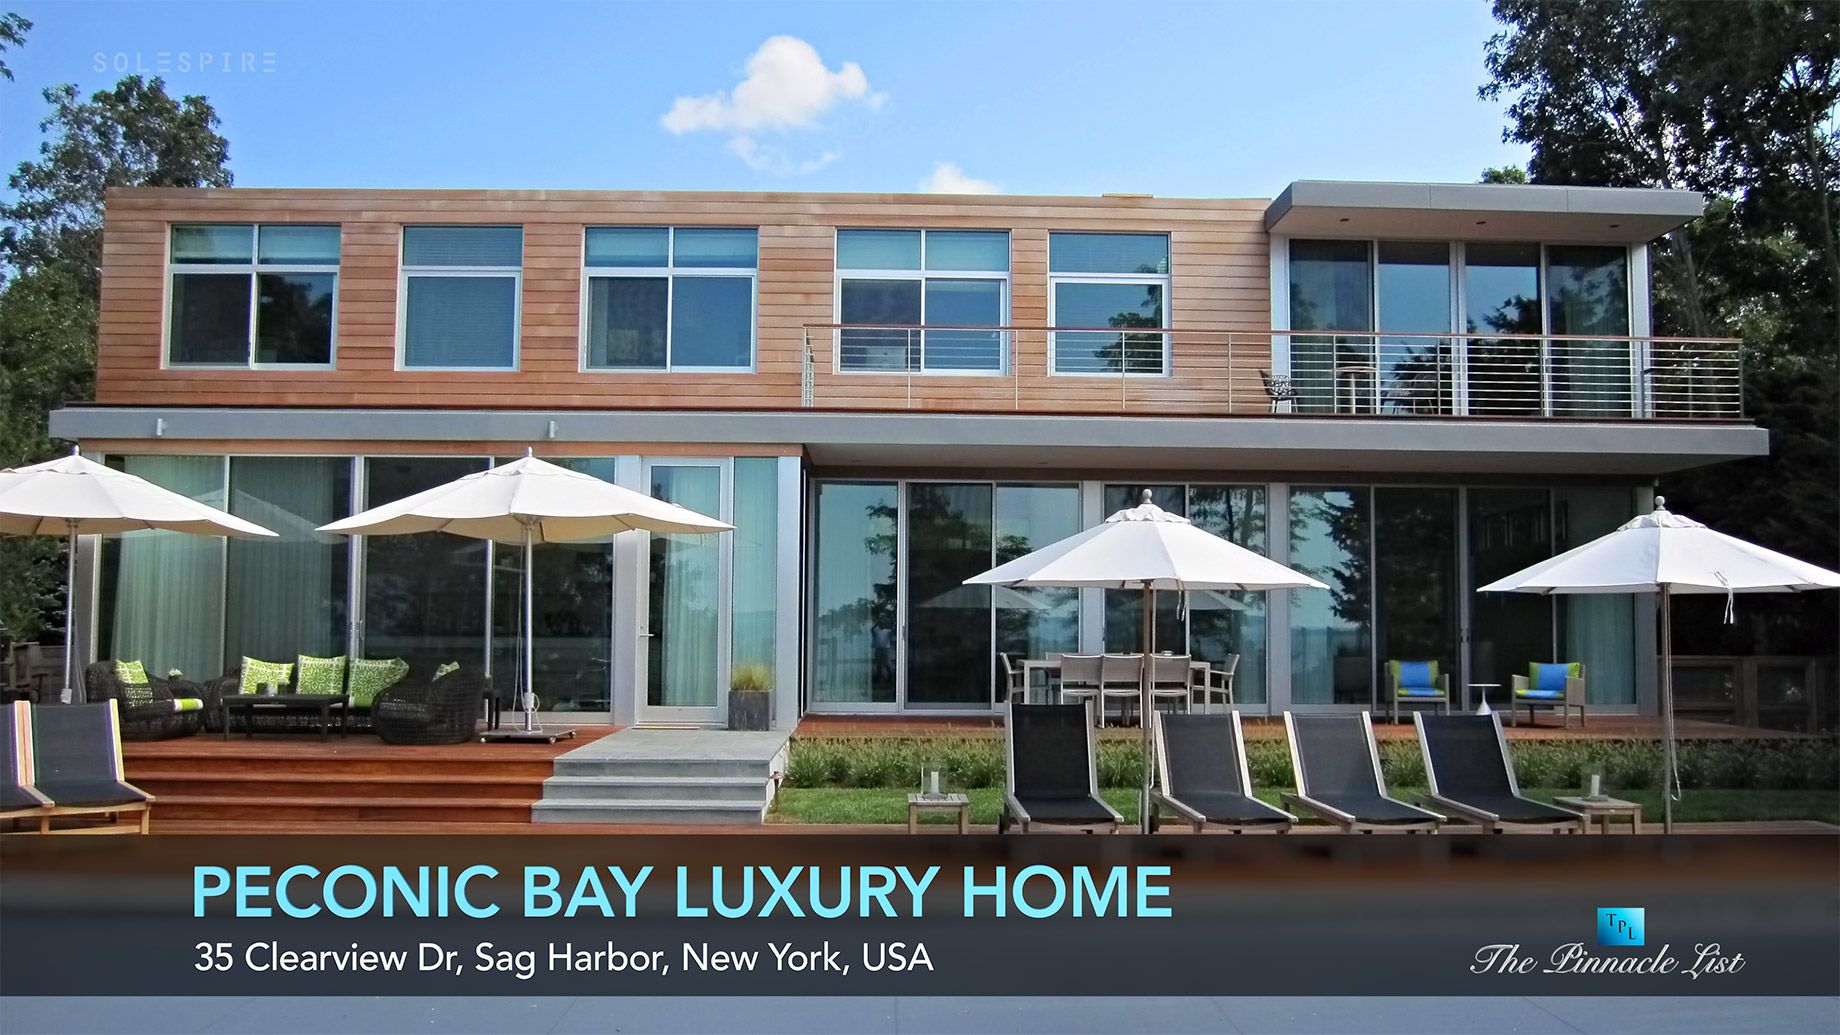 Luxury Home Design - Peconic Bay Residence - Clearview Dr, Sag Harbor, NY, USA - Luxury Real Estate